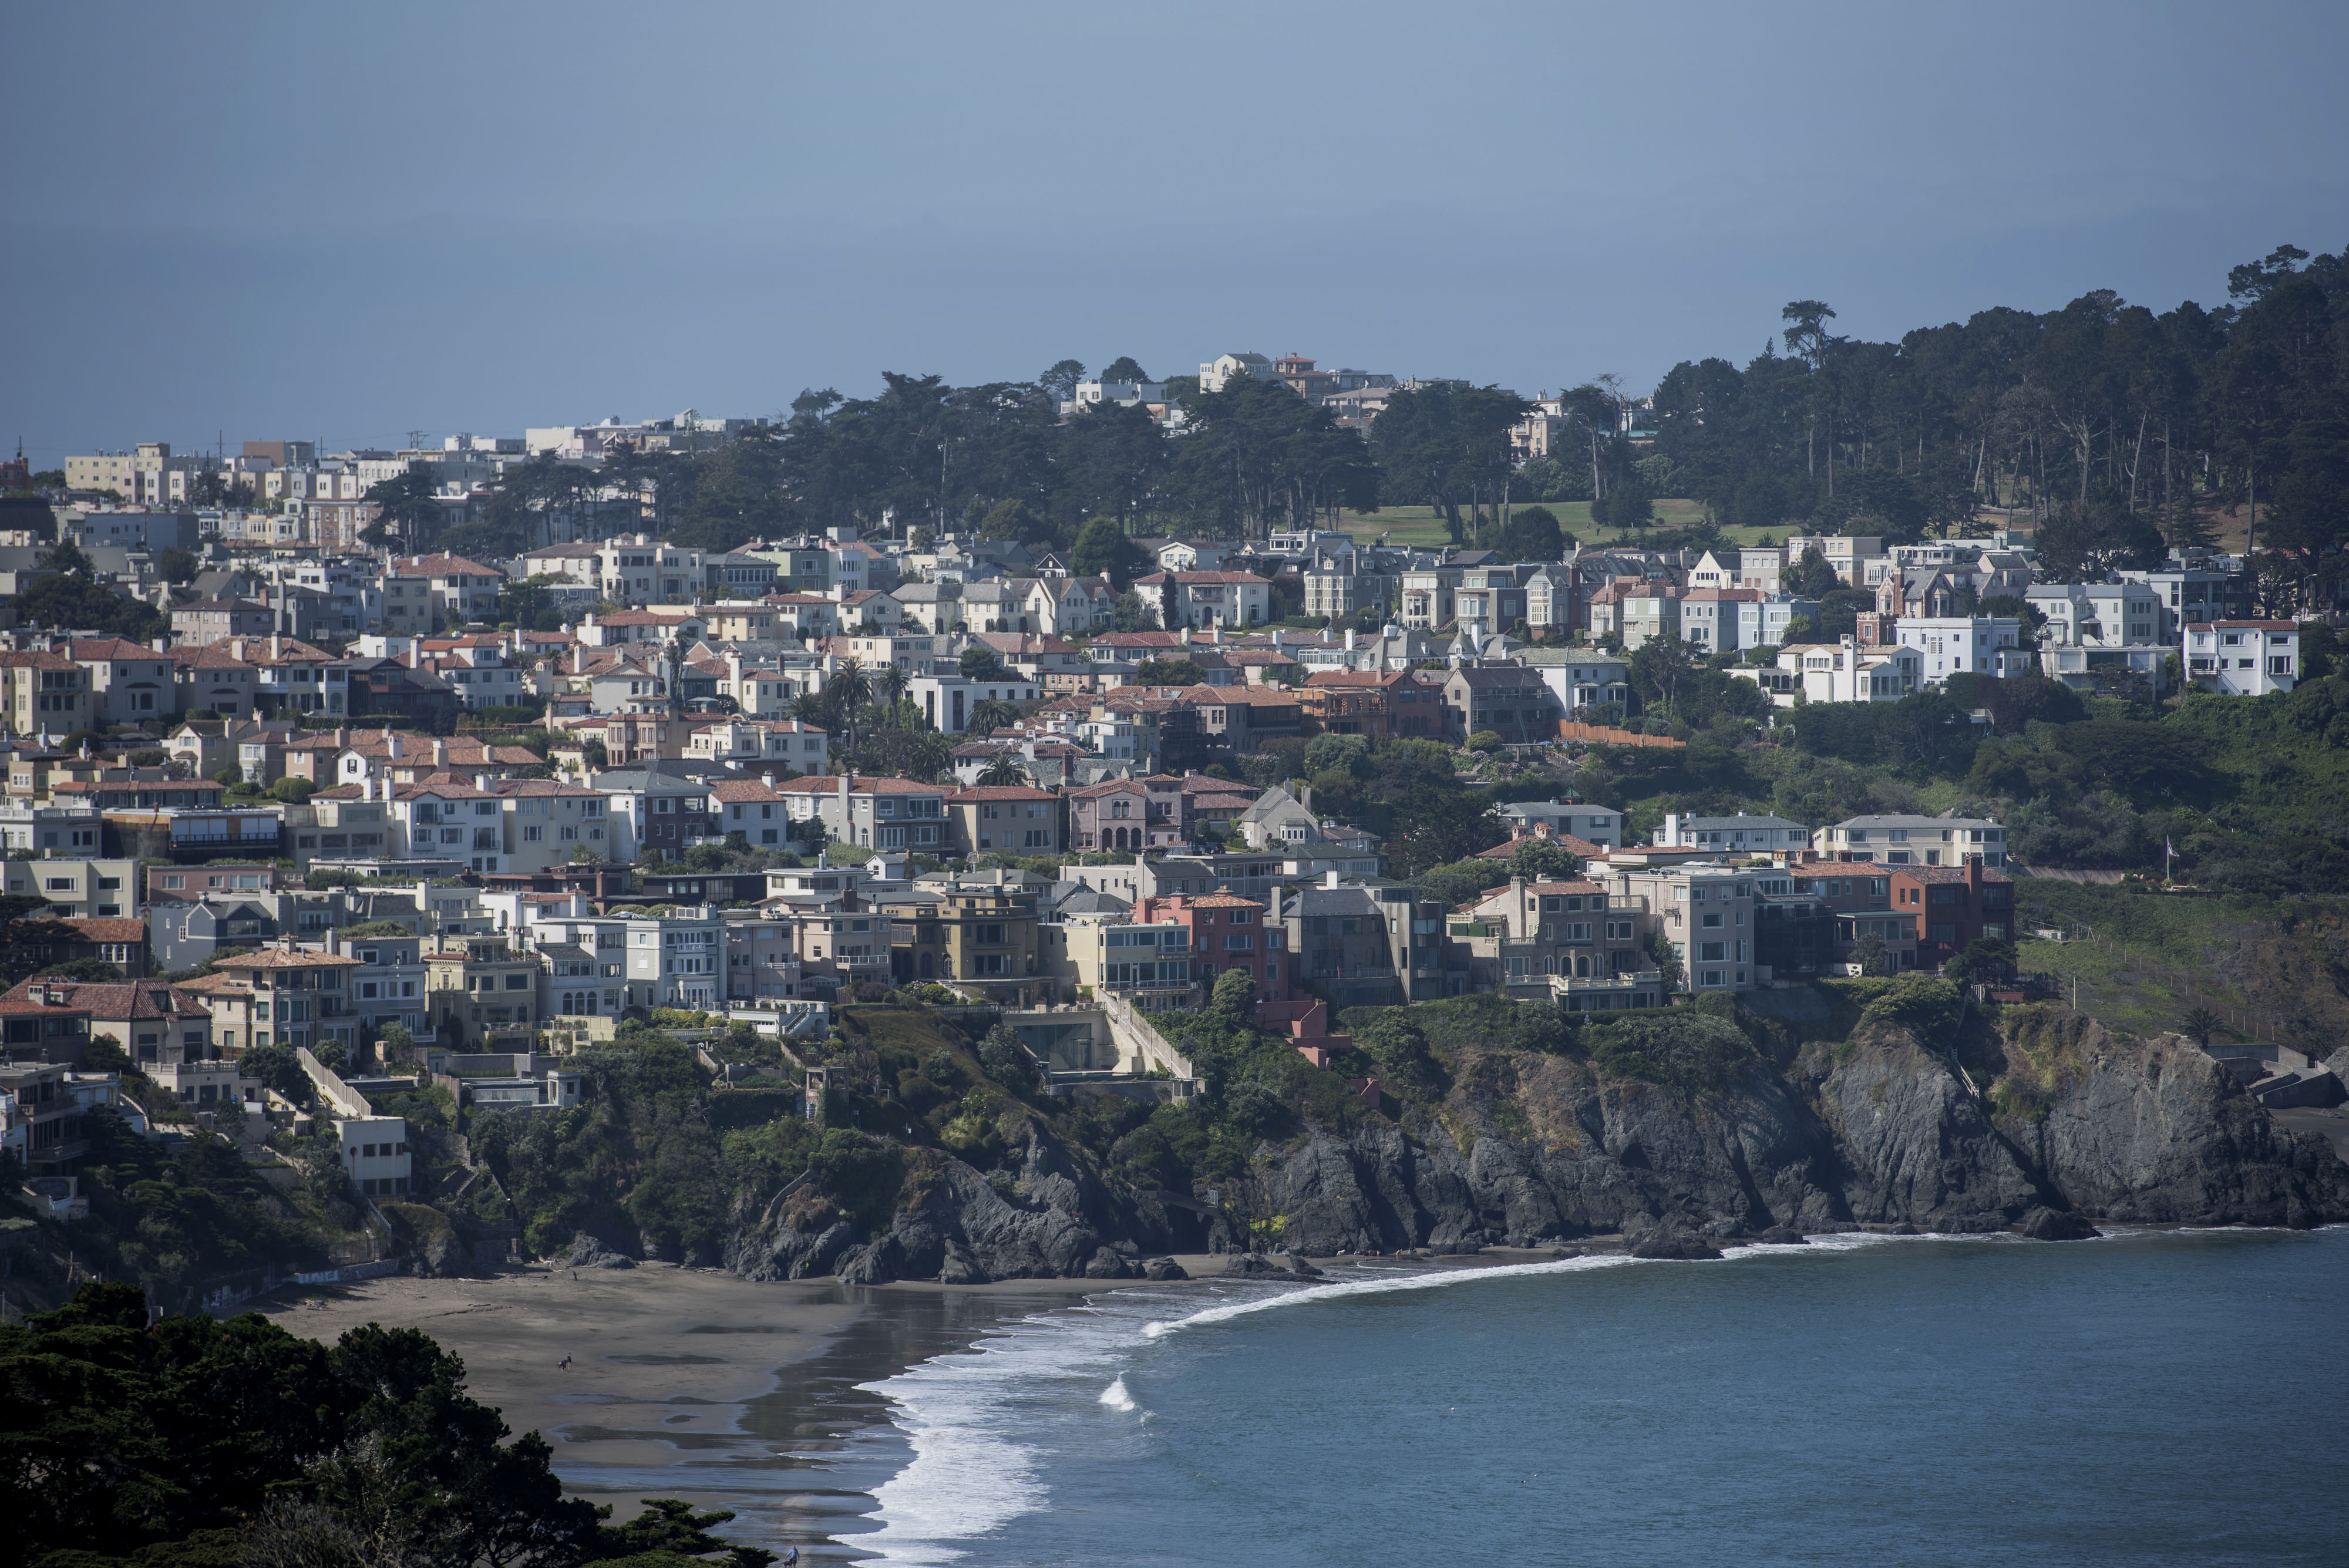 Residential homes stand in the Sea Cliff area of San Francisco, California, U.S., on Friday, May 8, 2015.
